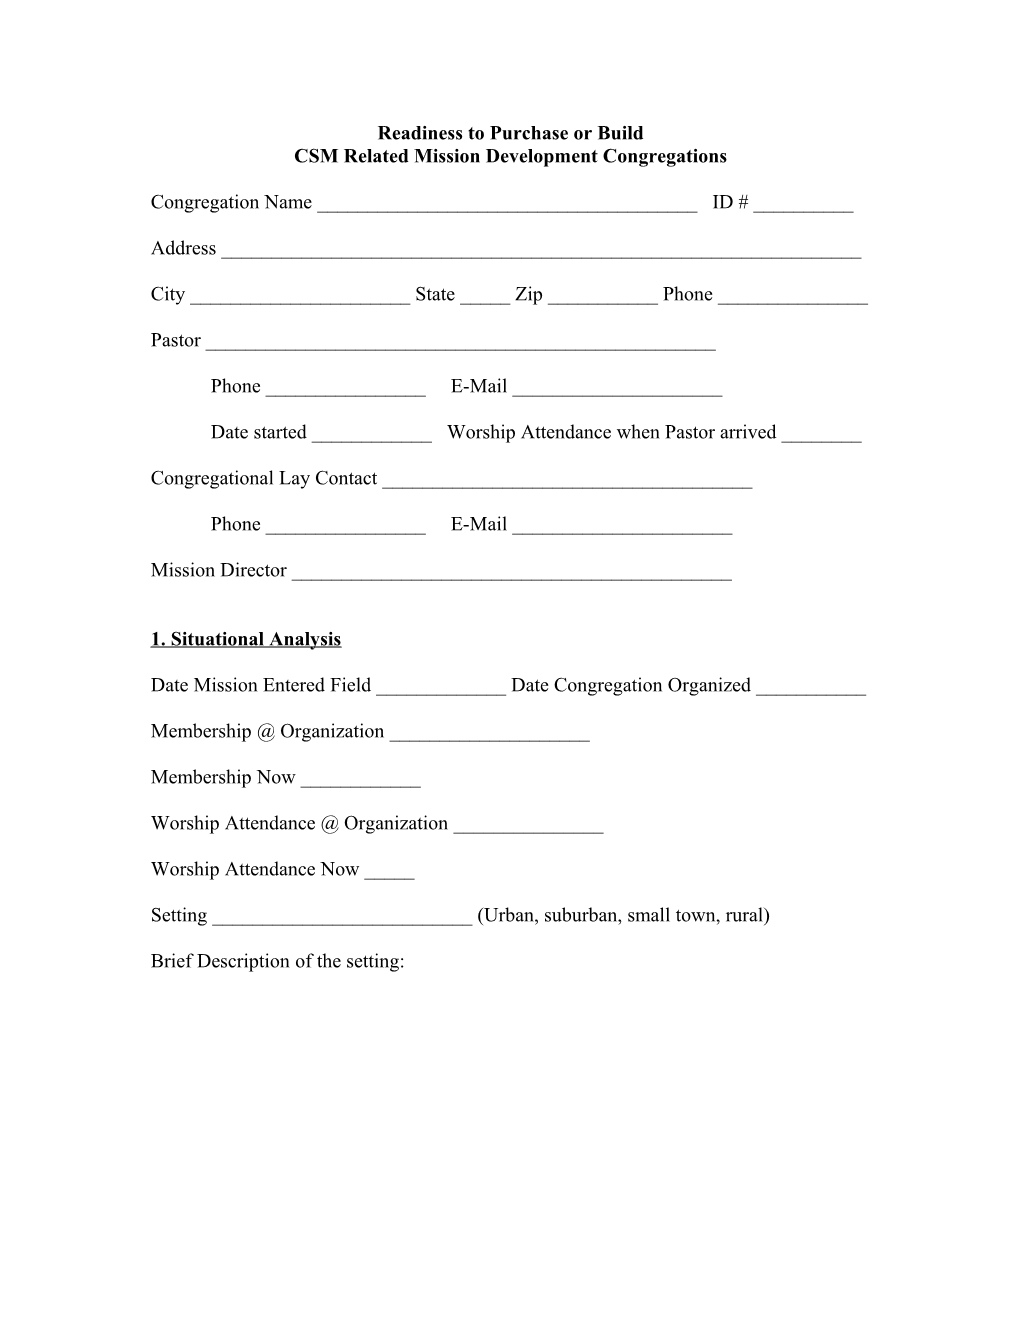 Readiness to Build Or Purchase Form